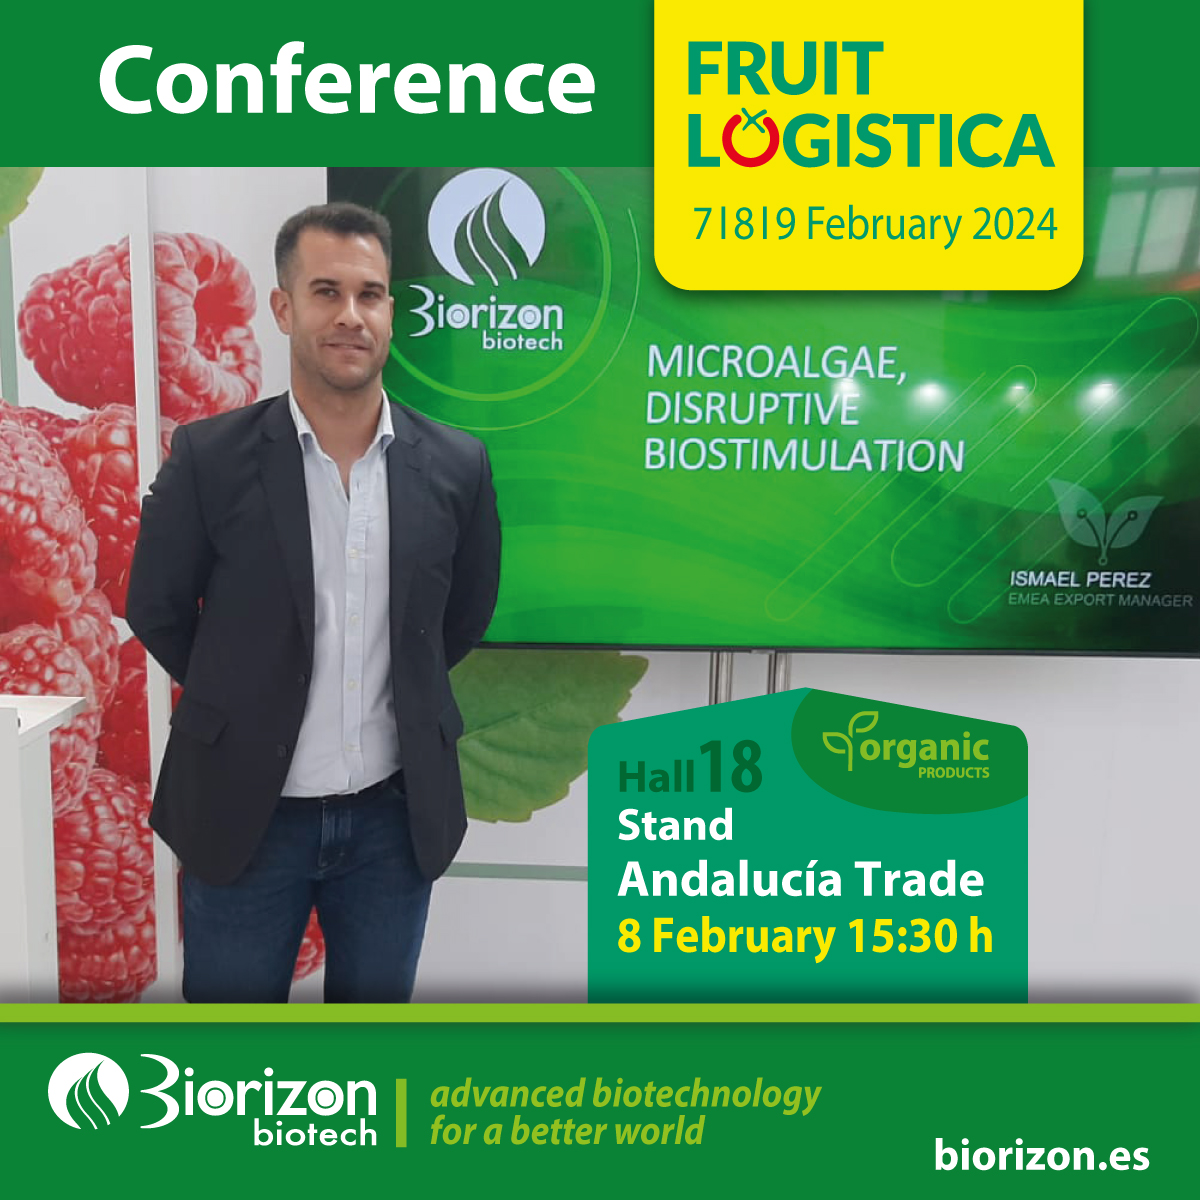 On 8 February at 15:30, if you are at @FRUITLOGISTICA 2024, book our conference in your diary. Ismael Pérez will speak to the attendees about '#Microalgae, disruptive #biostimulation'. We will be waiting for you in Hall 18, @trade_andalucia Stand. #sustainableagriculture